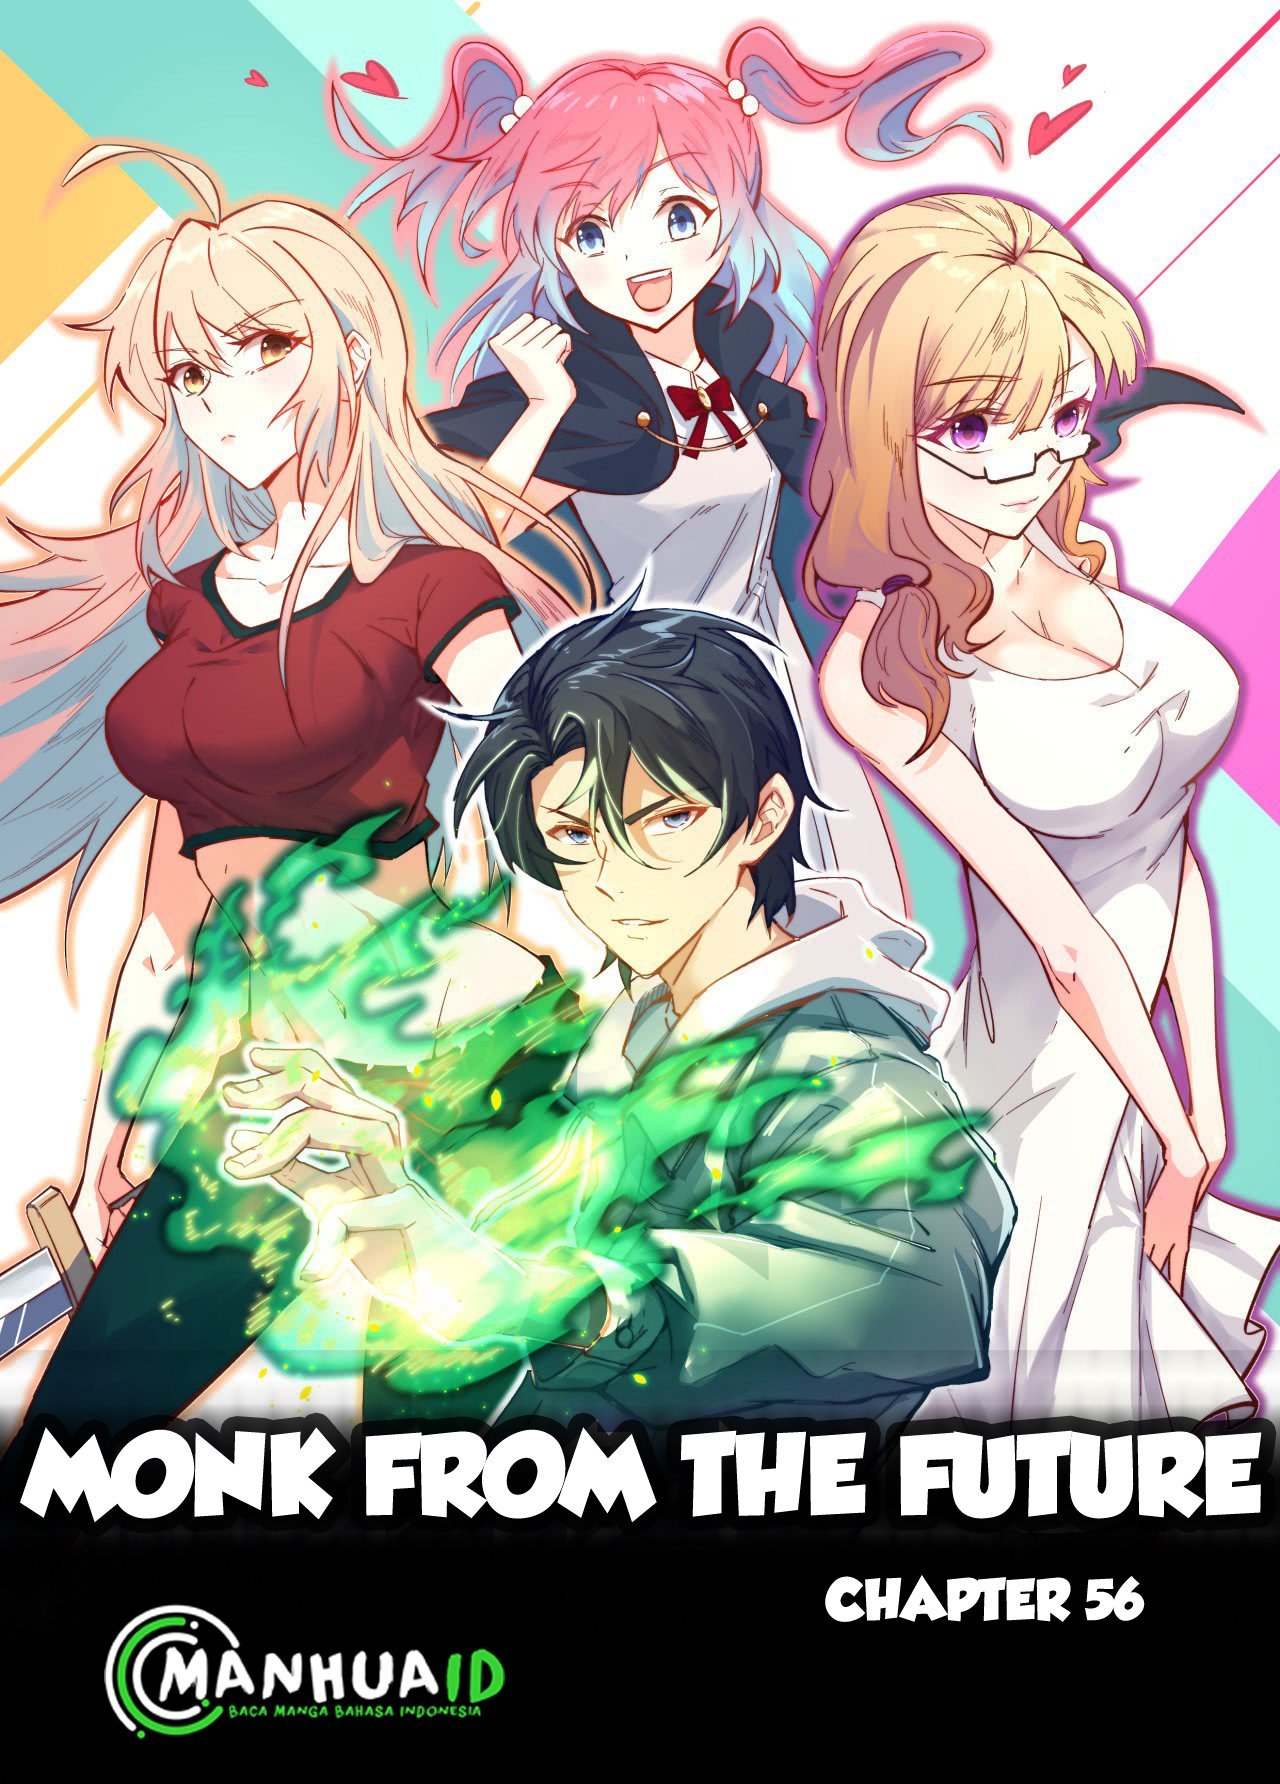 Monk From the Future Chapter 56